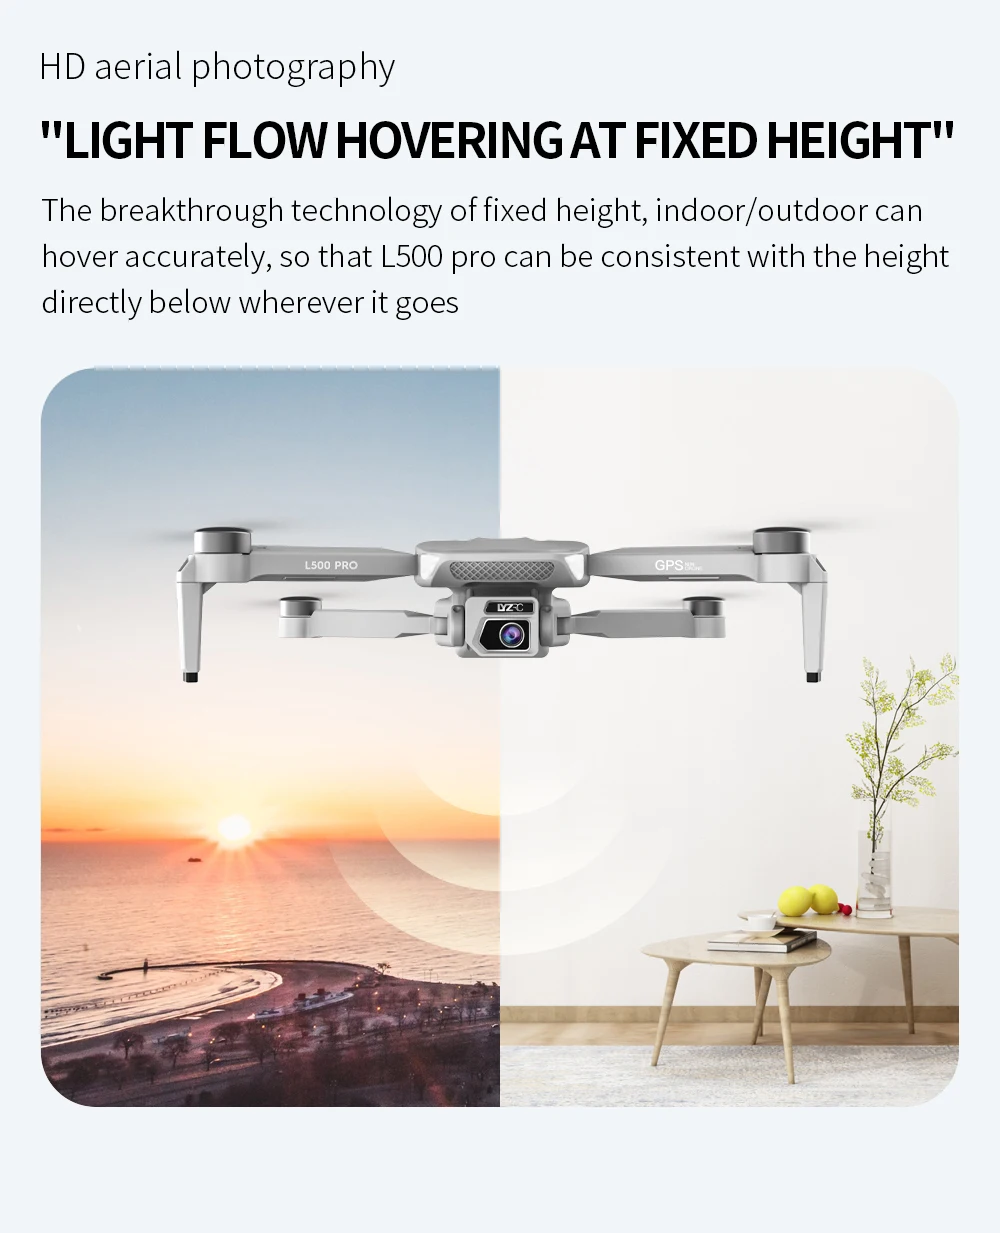 L500 PRO GPS Drone, the breakthrough technology of fixed height; indoor/outdoor can hover accurately . LSOO